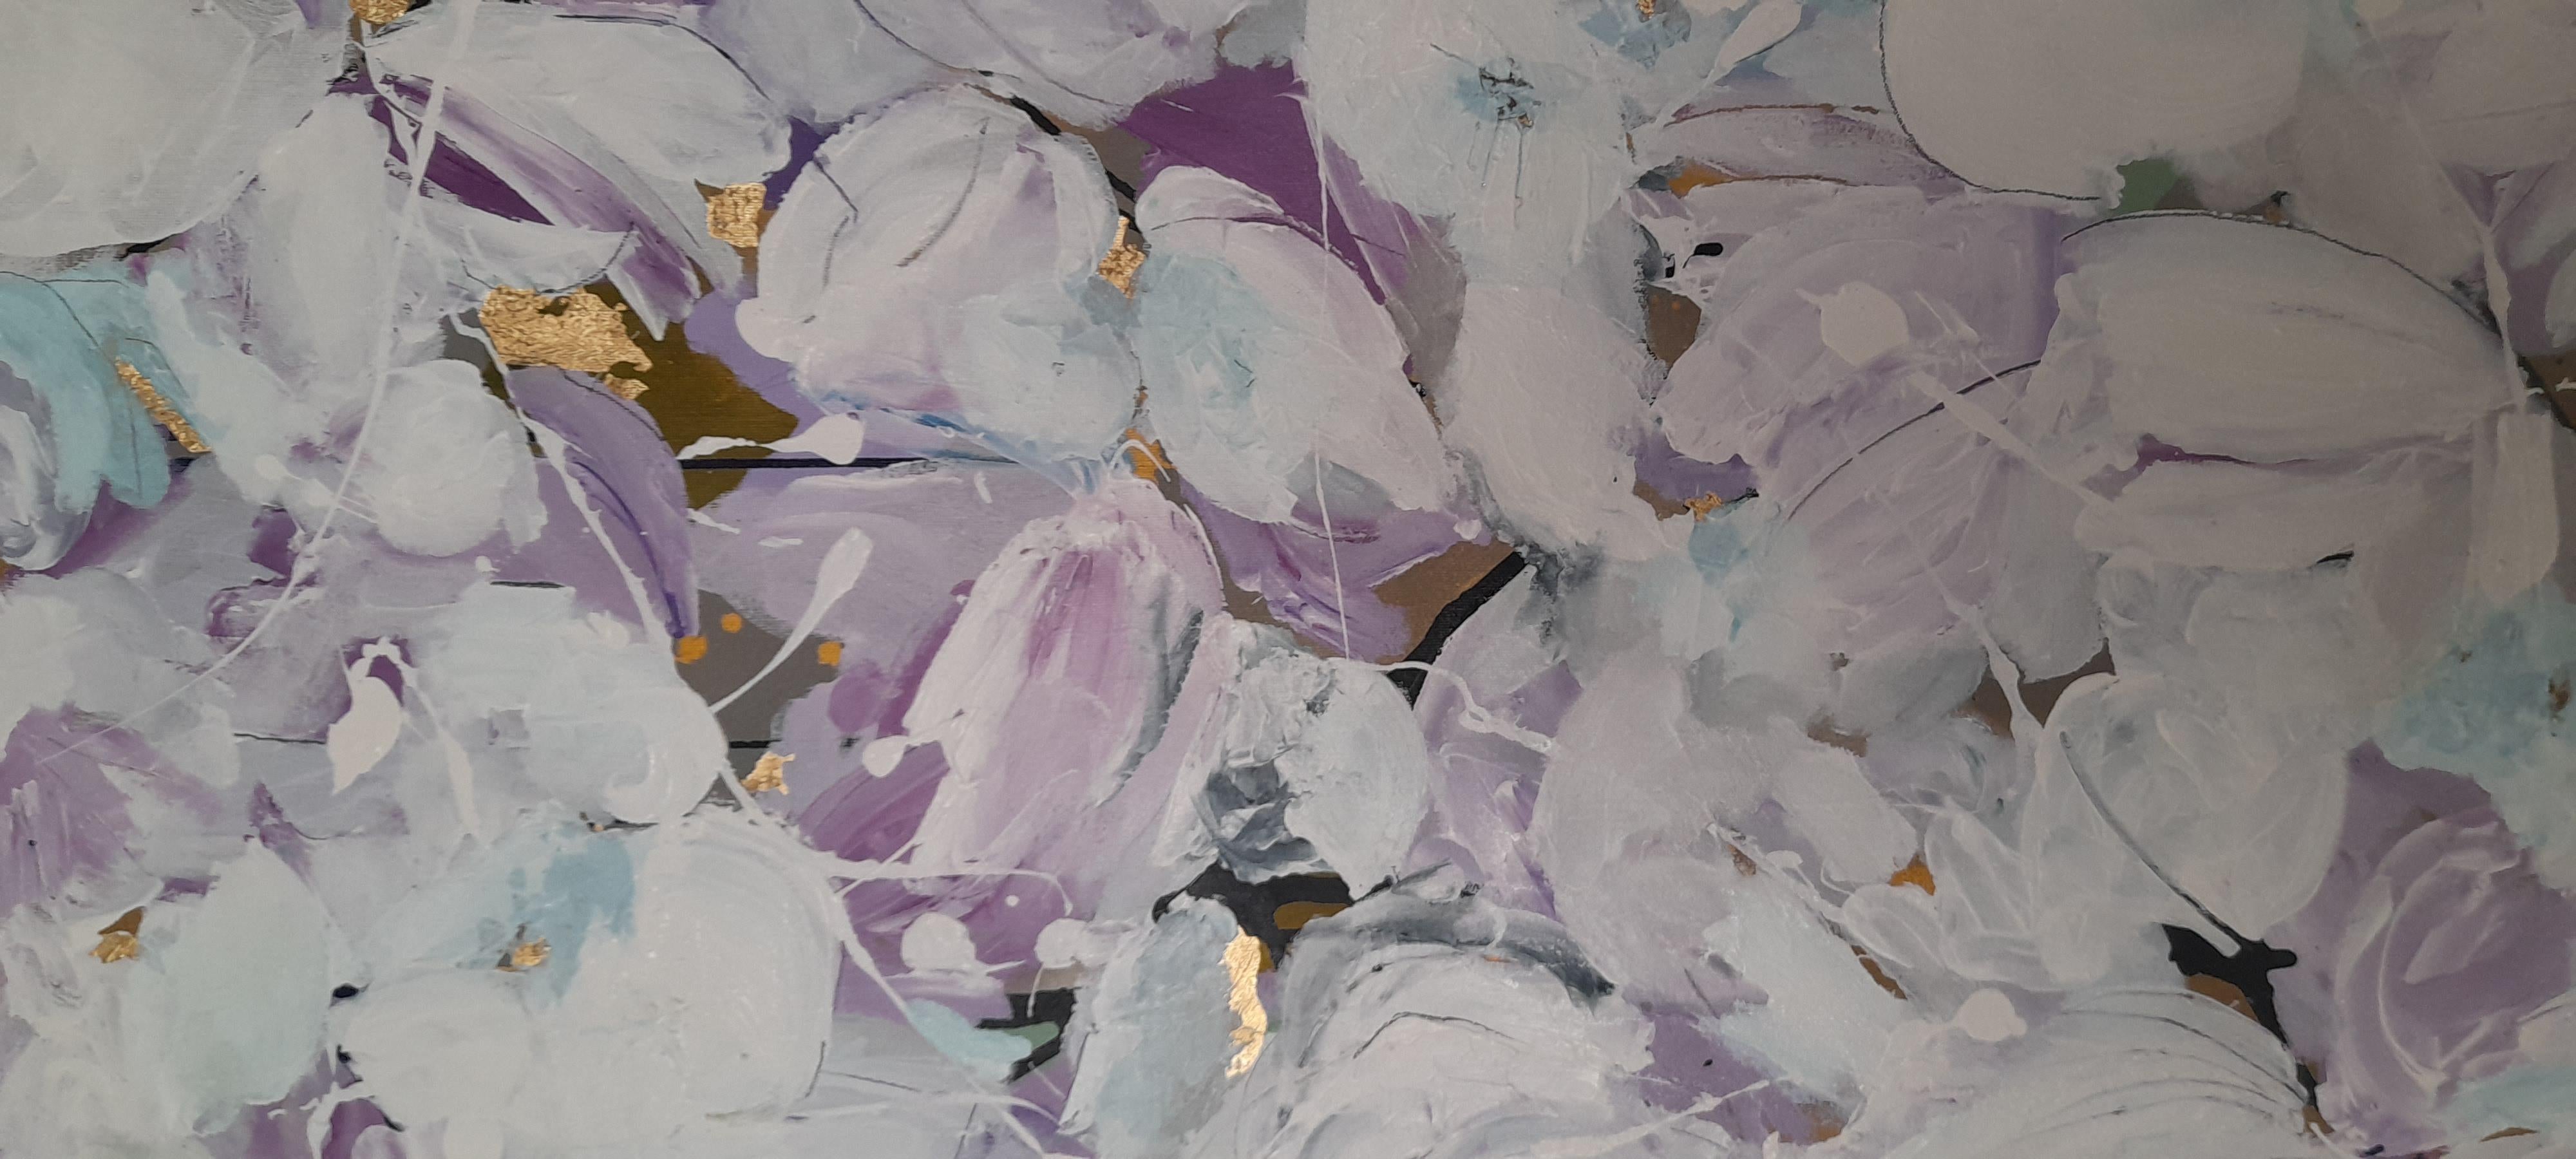 I love Magnolia Blossom and this is a homage to the wonderful subtle purples and golds you get at Magnolia Blossom time. I was playing with the fabulous forms and structure of the flower using a paint that I could draw with as well as the purples